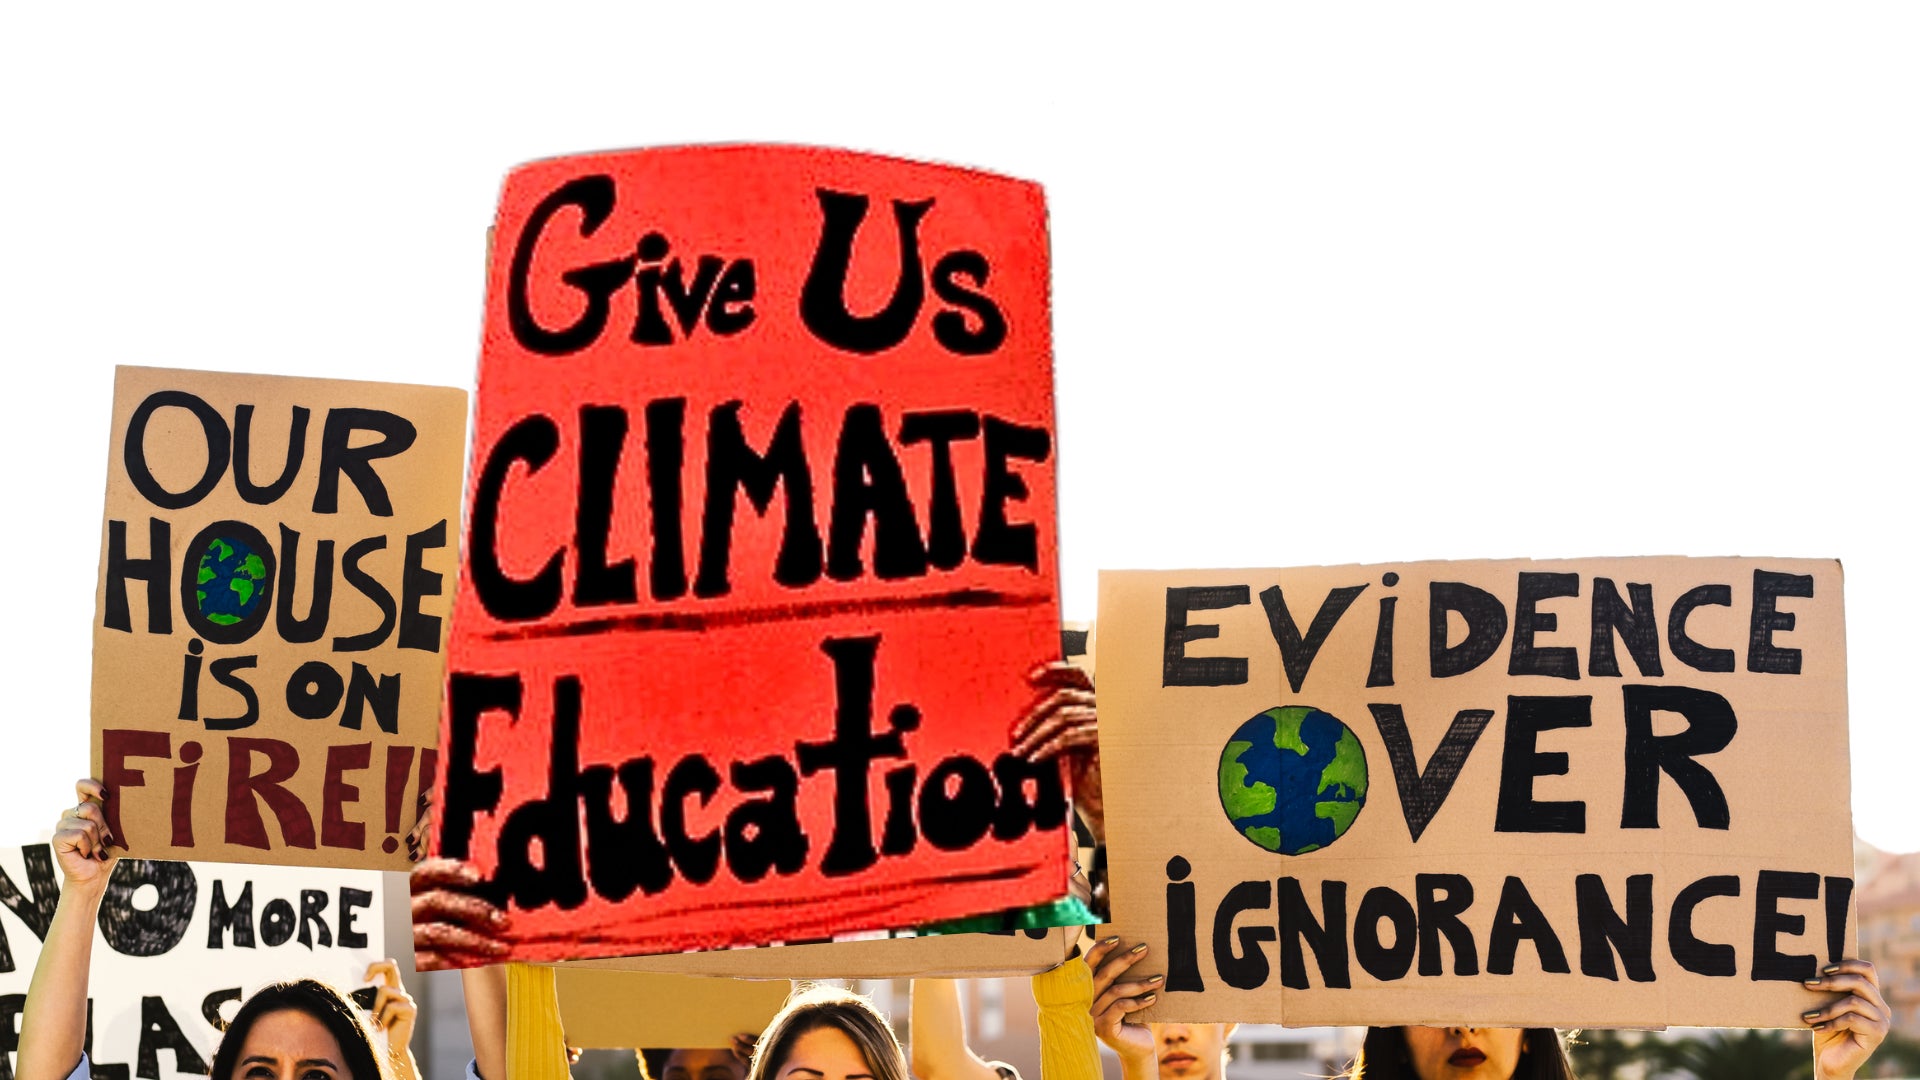 Three signs: "Our house is on fire!!", "Give Us CLIMATE Education", "Evidence Over Ignorance"